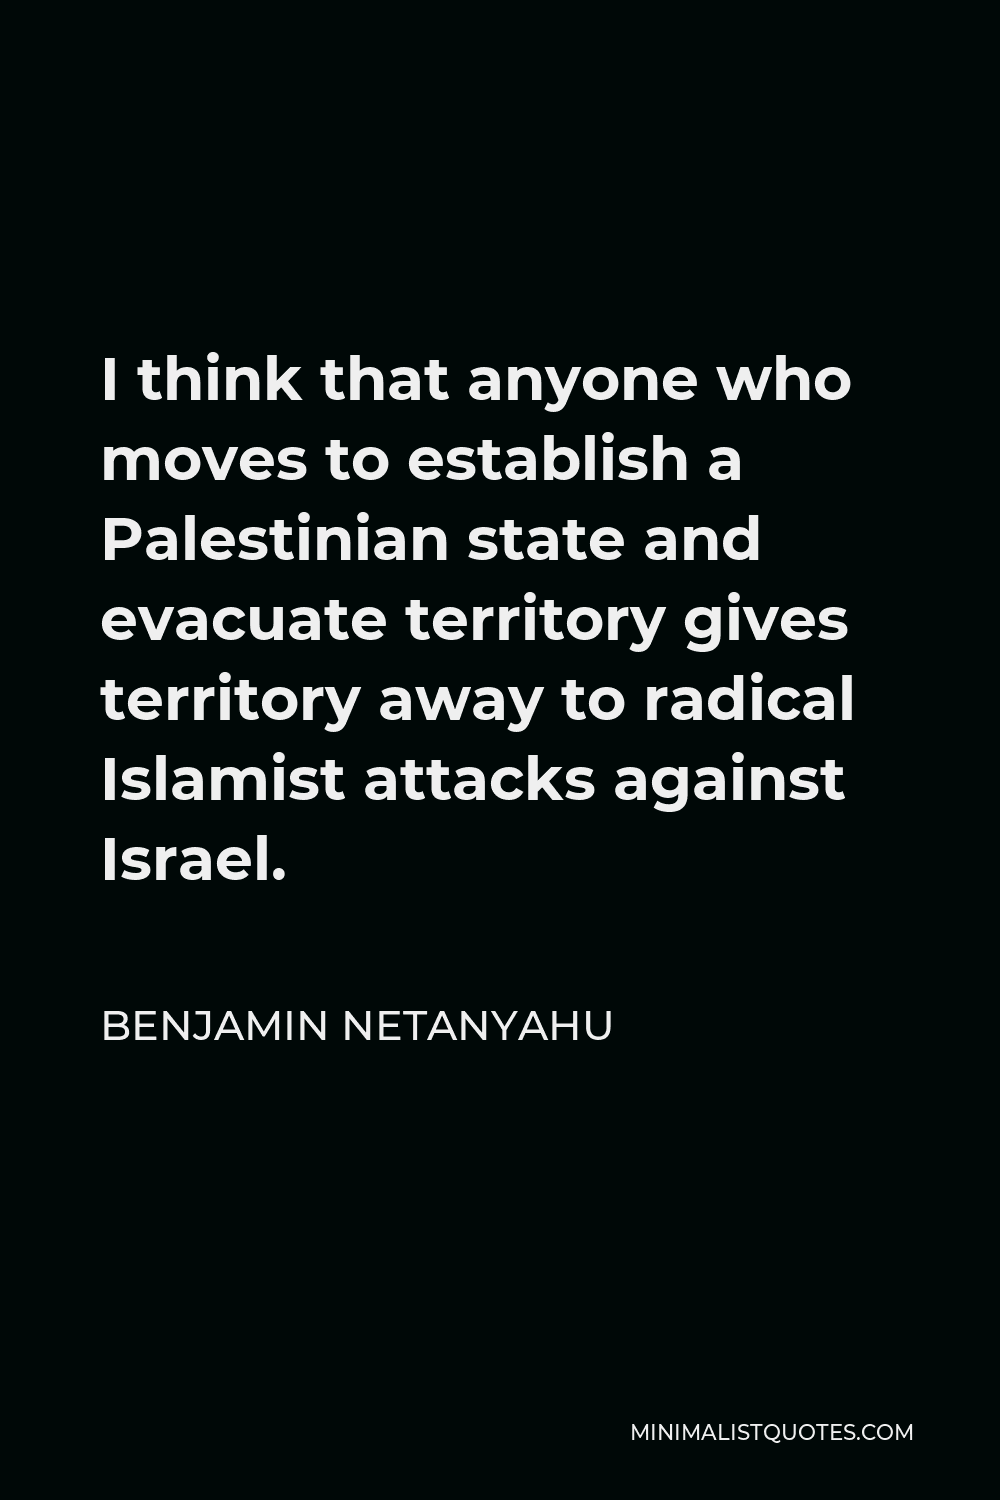 Benjamin Netanyahu Quote - I think that anyone who moves to establish a Palestinian state and evacuate territory gives territory away to radical Islamist attacks against Israel.